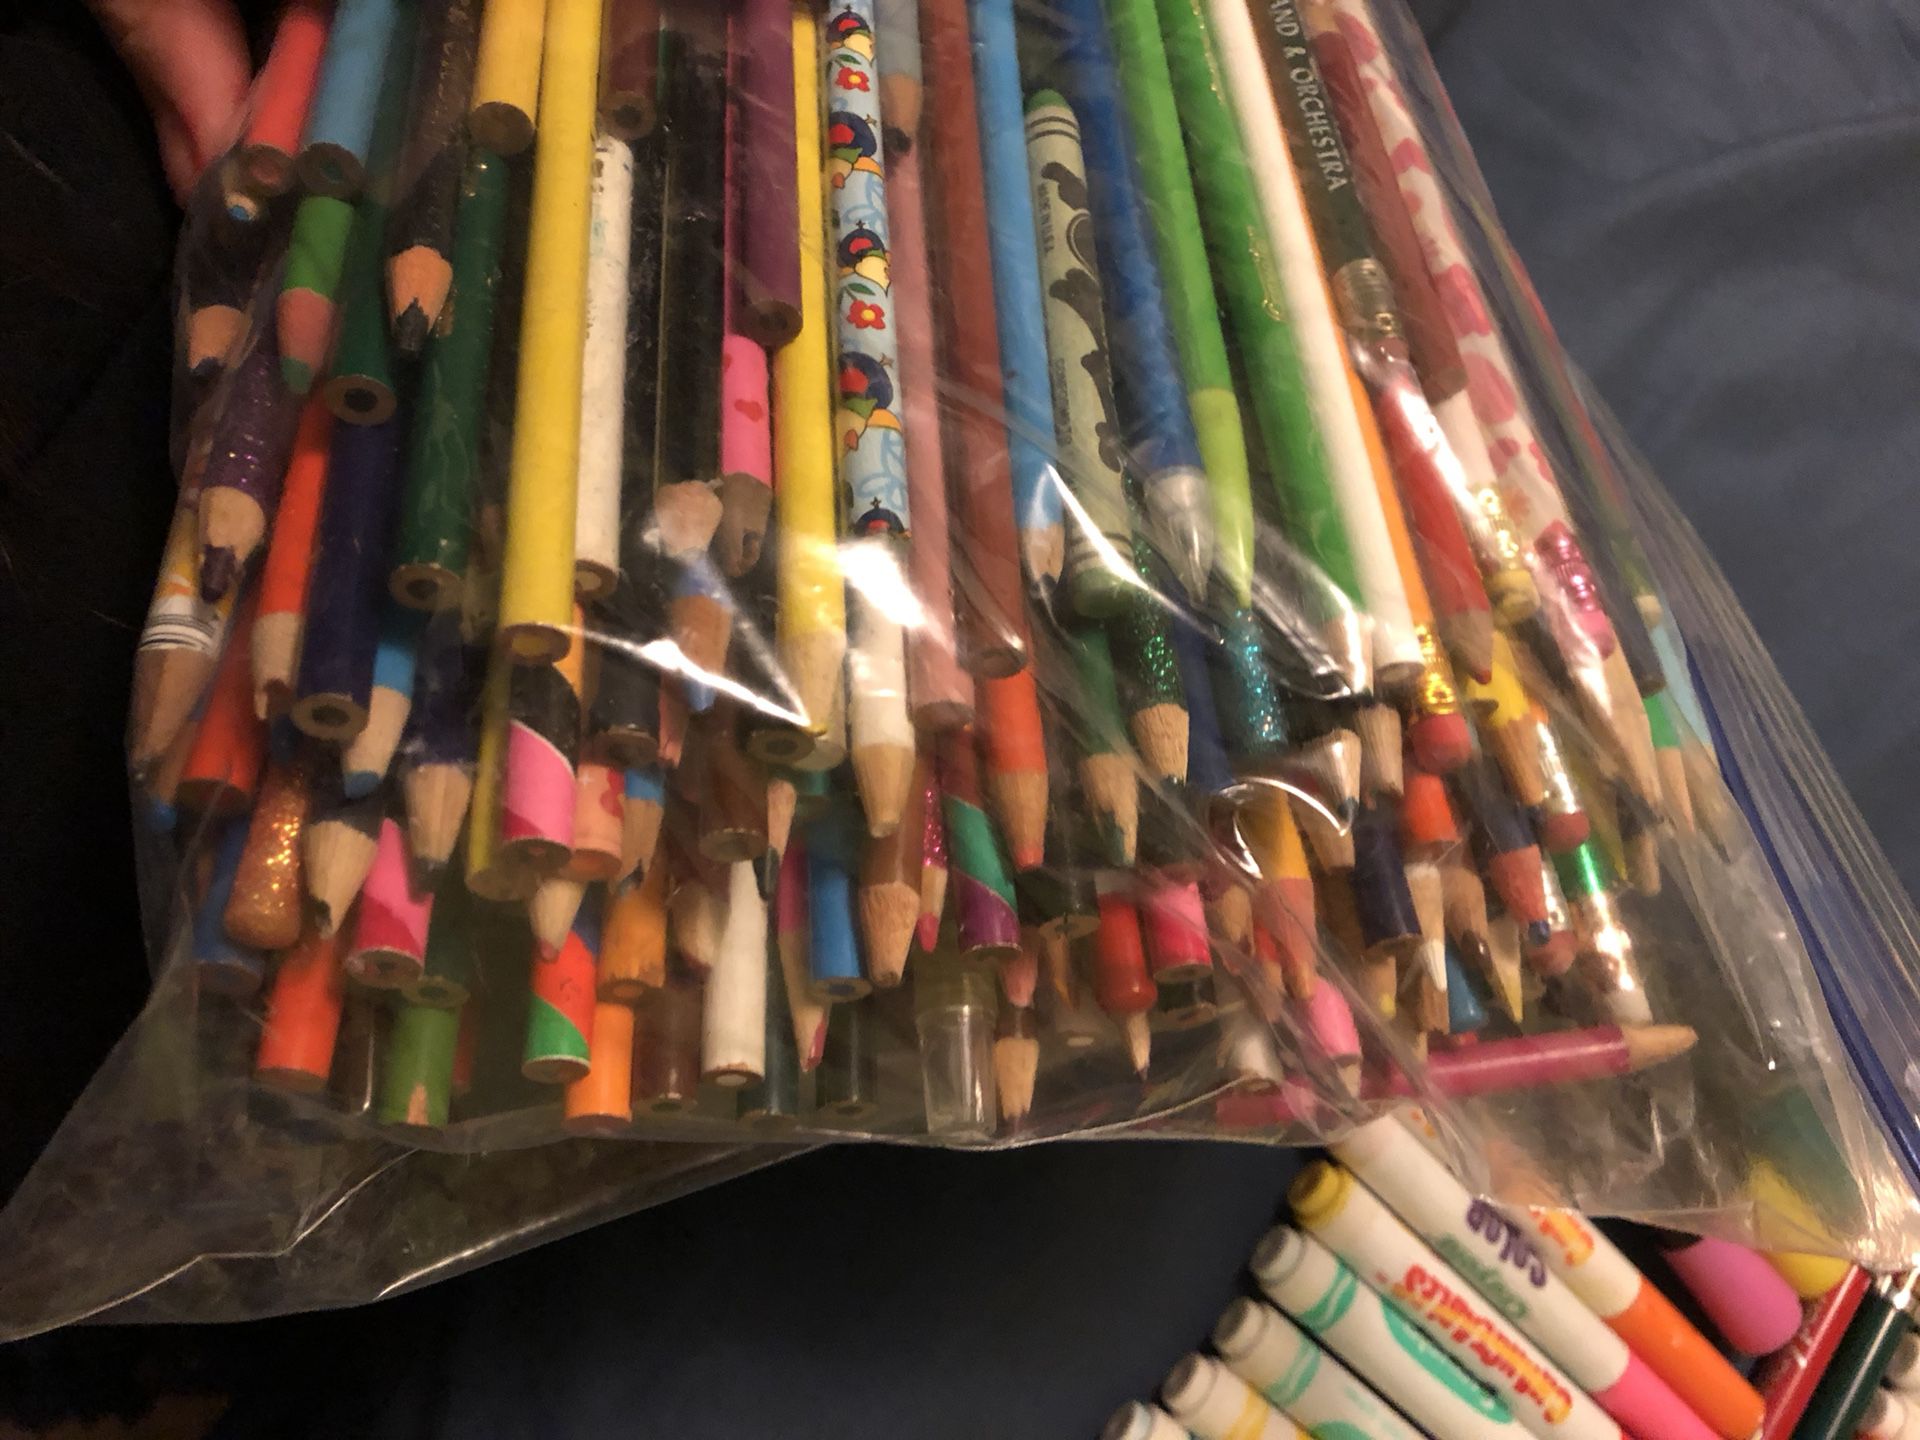 Art set in wood case with Crayola 120 crayons for Sale in Edison, NJ -  OfferUp